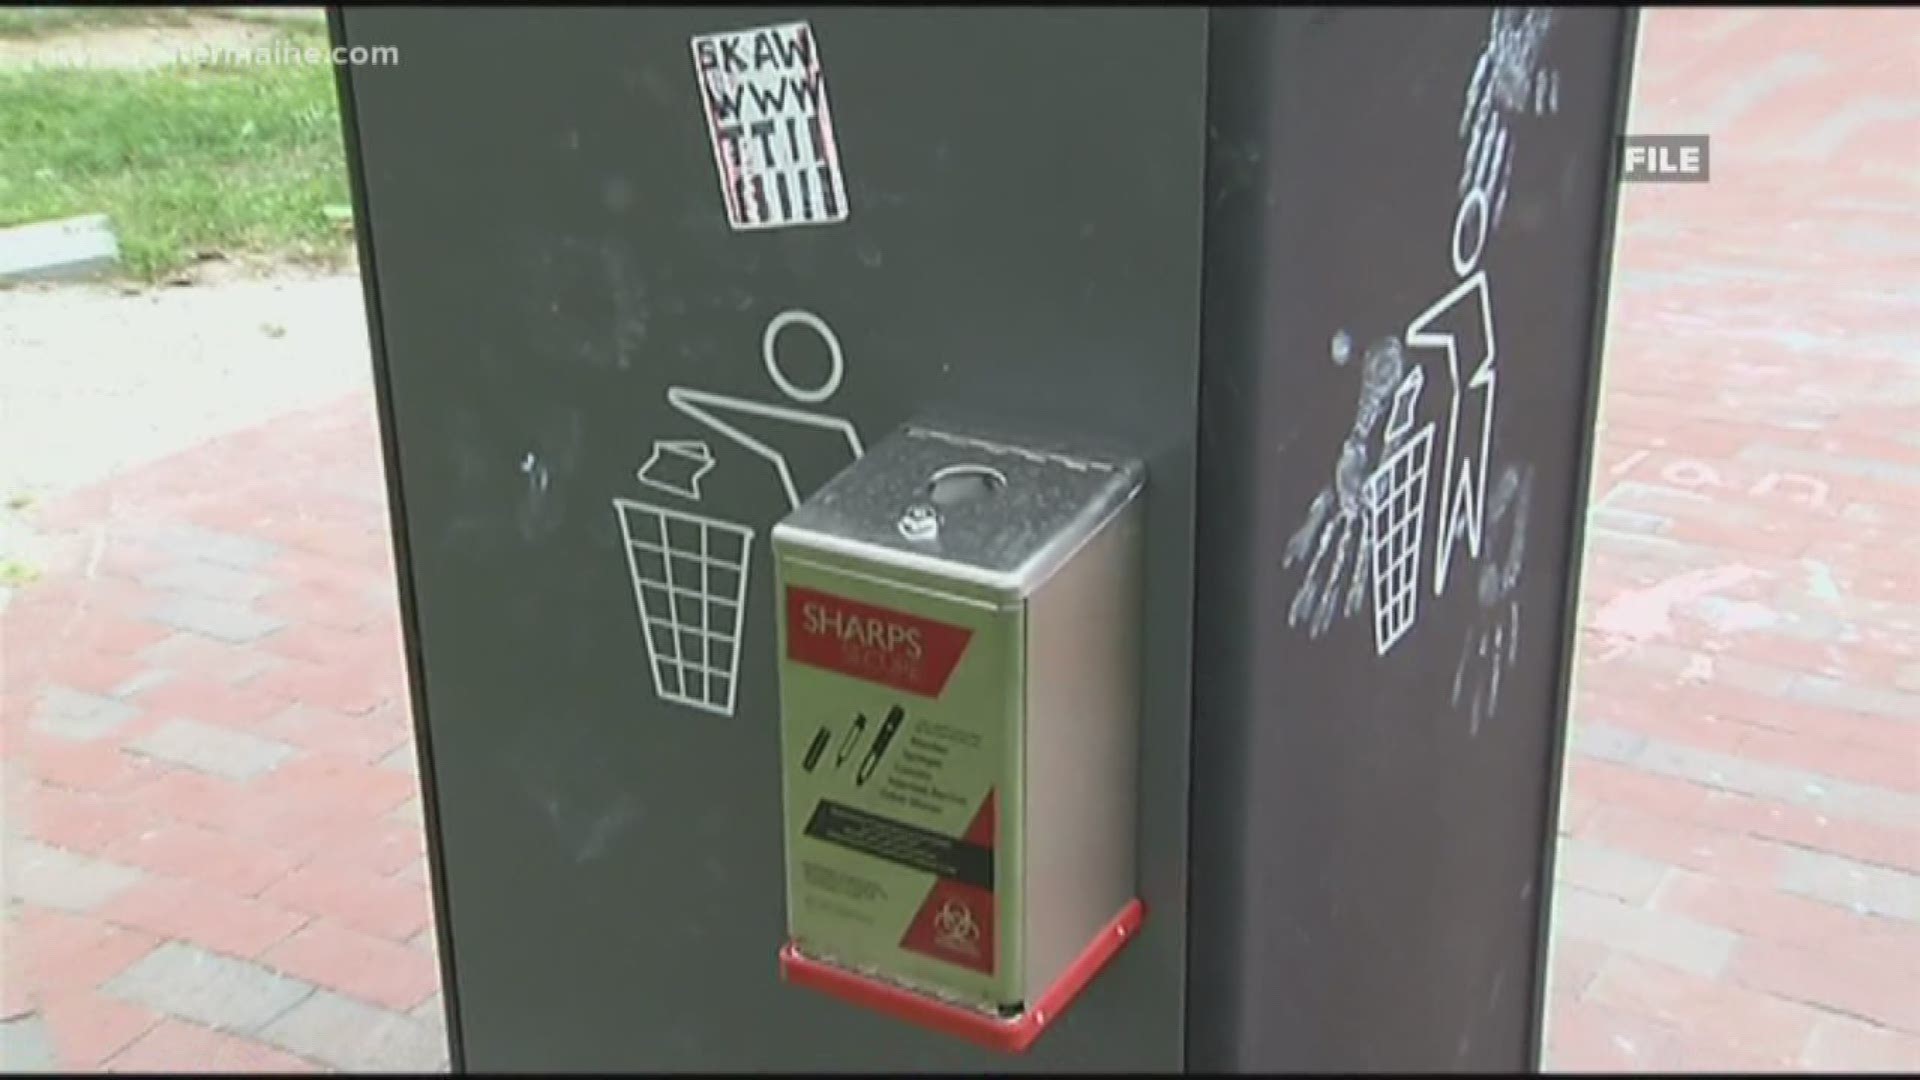 The Lewiston city council will vote on a plan to place disposal boxes for used syringes around the city.